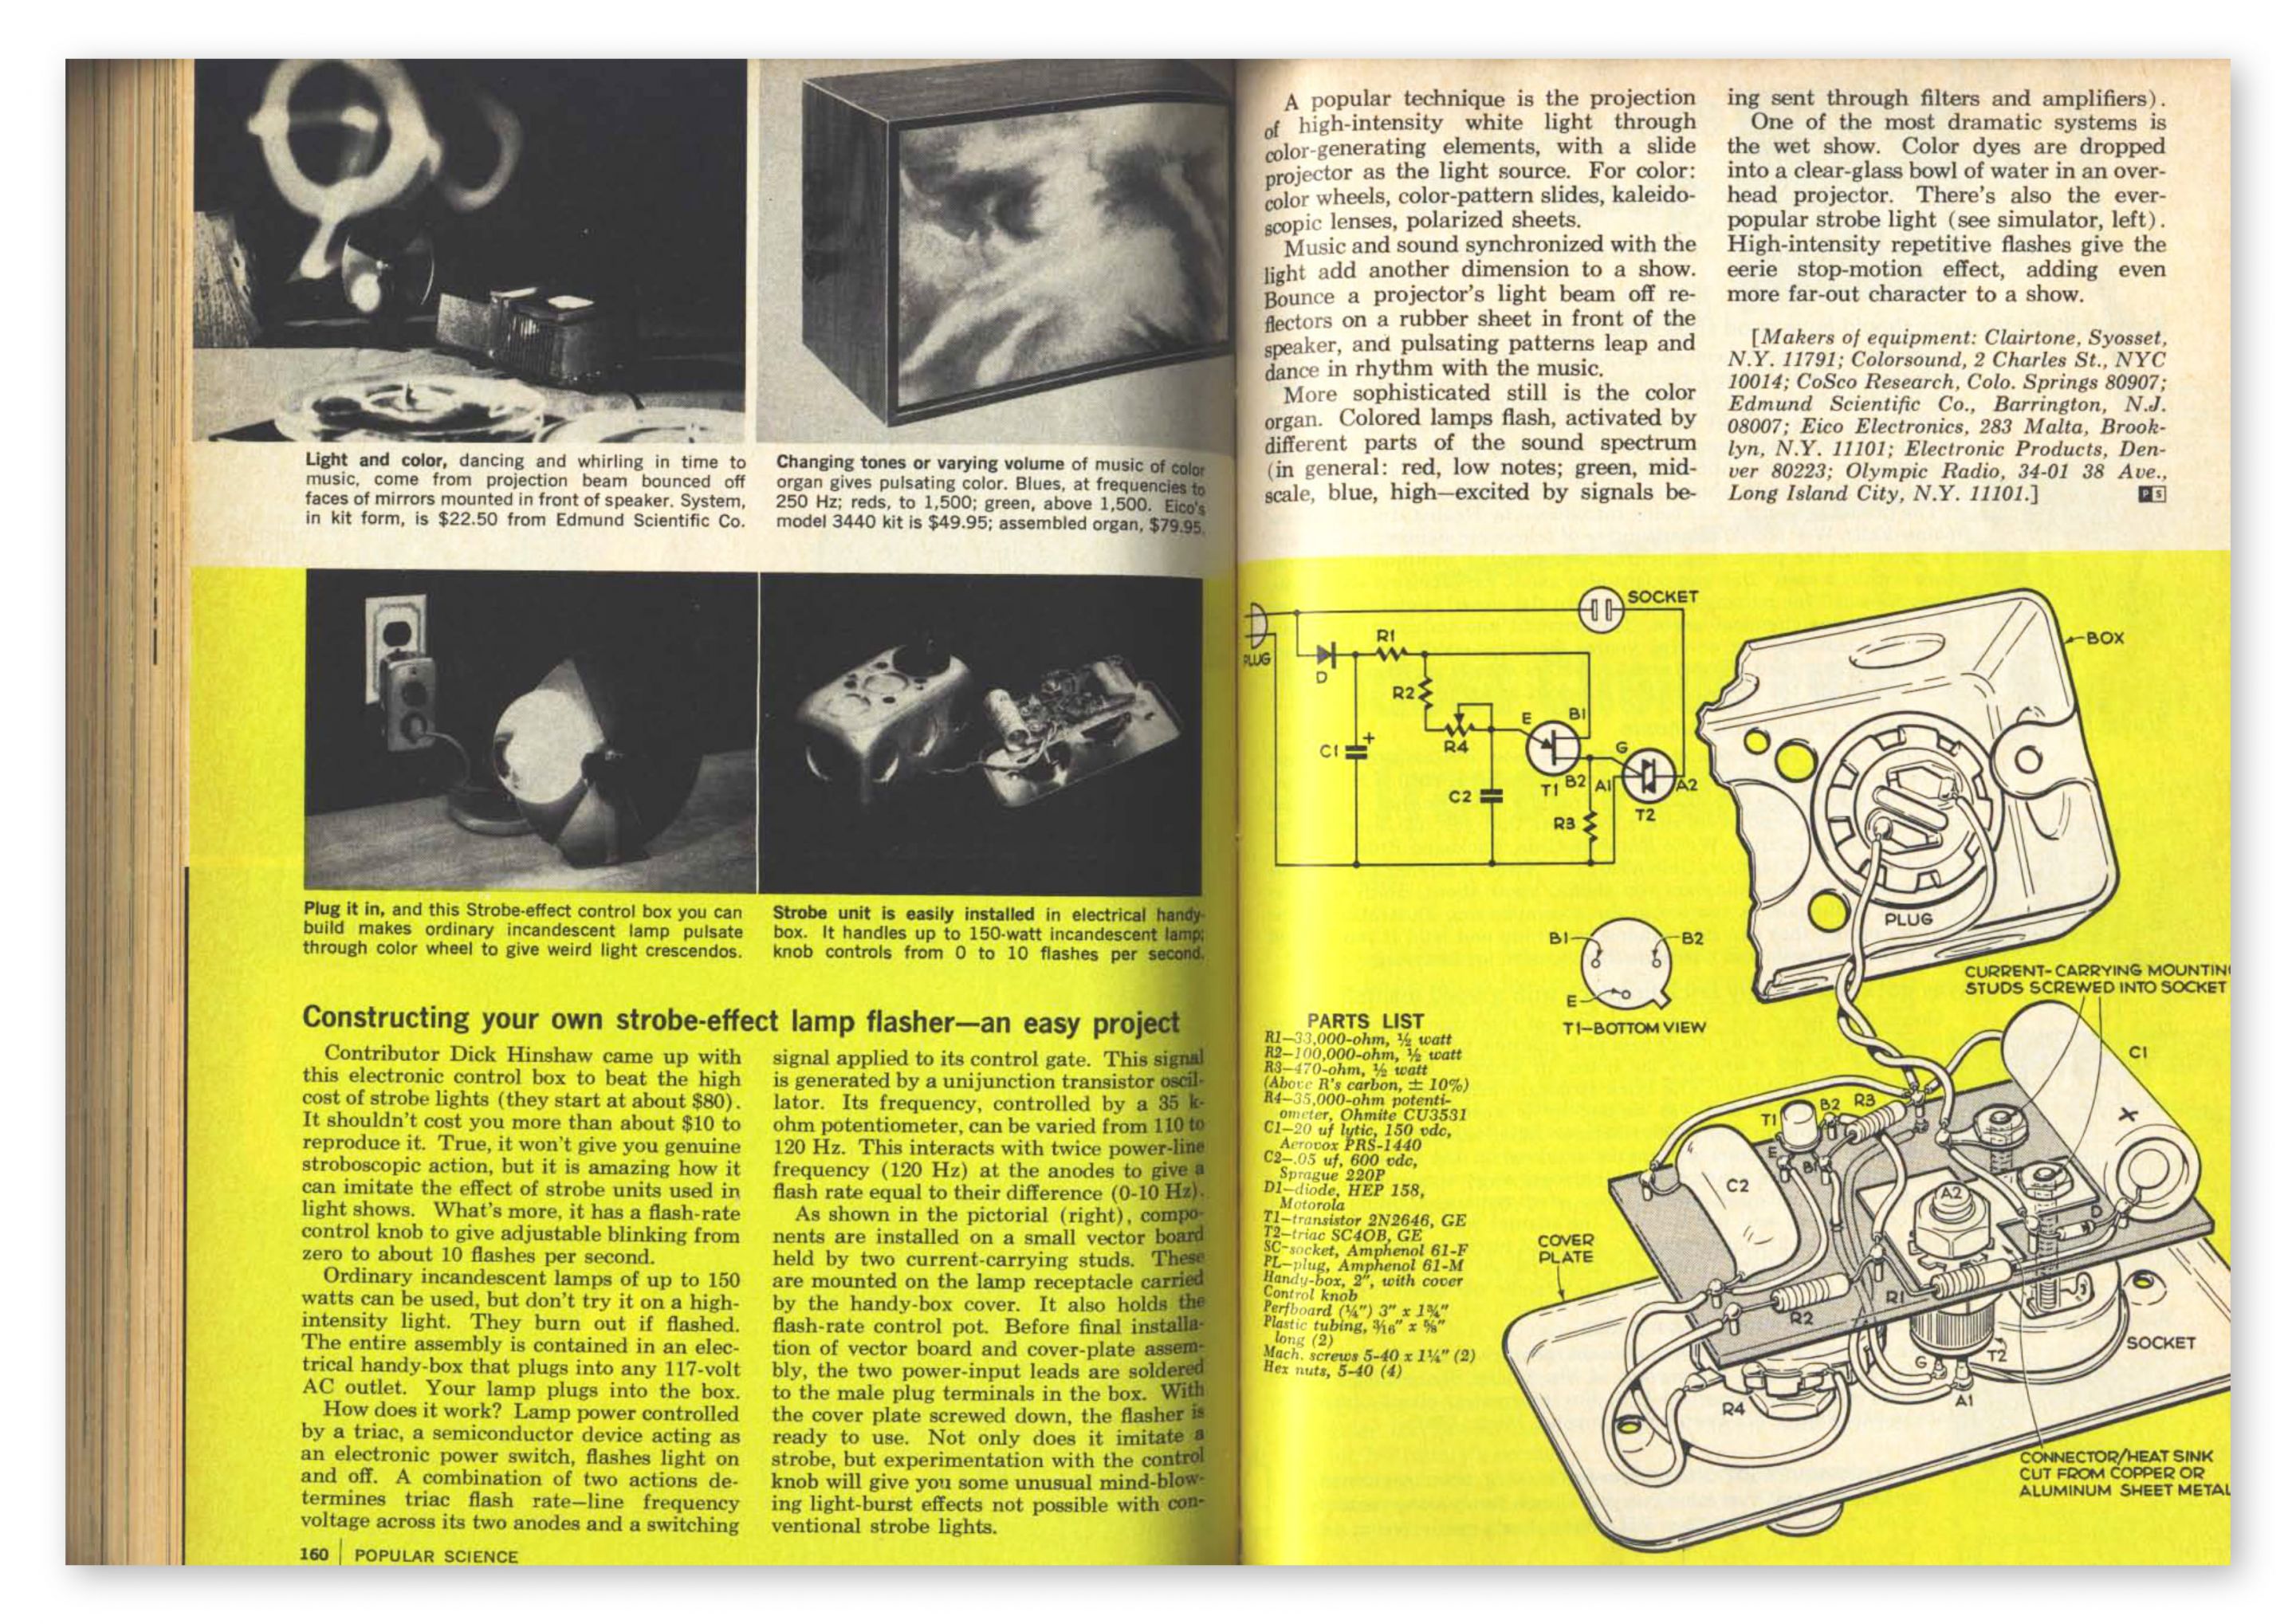 Popular Science Magazine, May 1969, Psychedelic Light-Show Systems